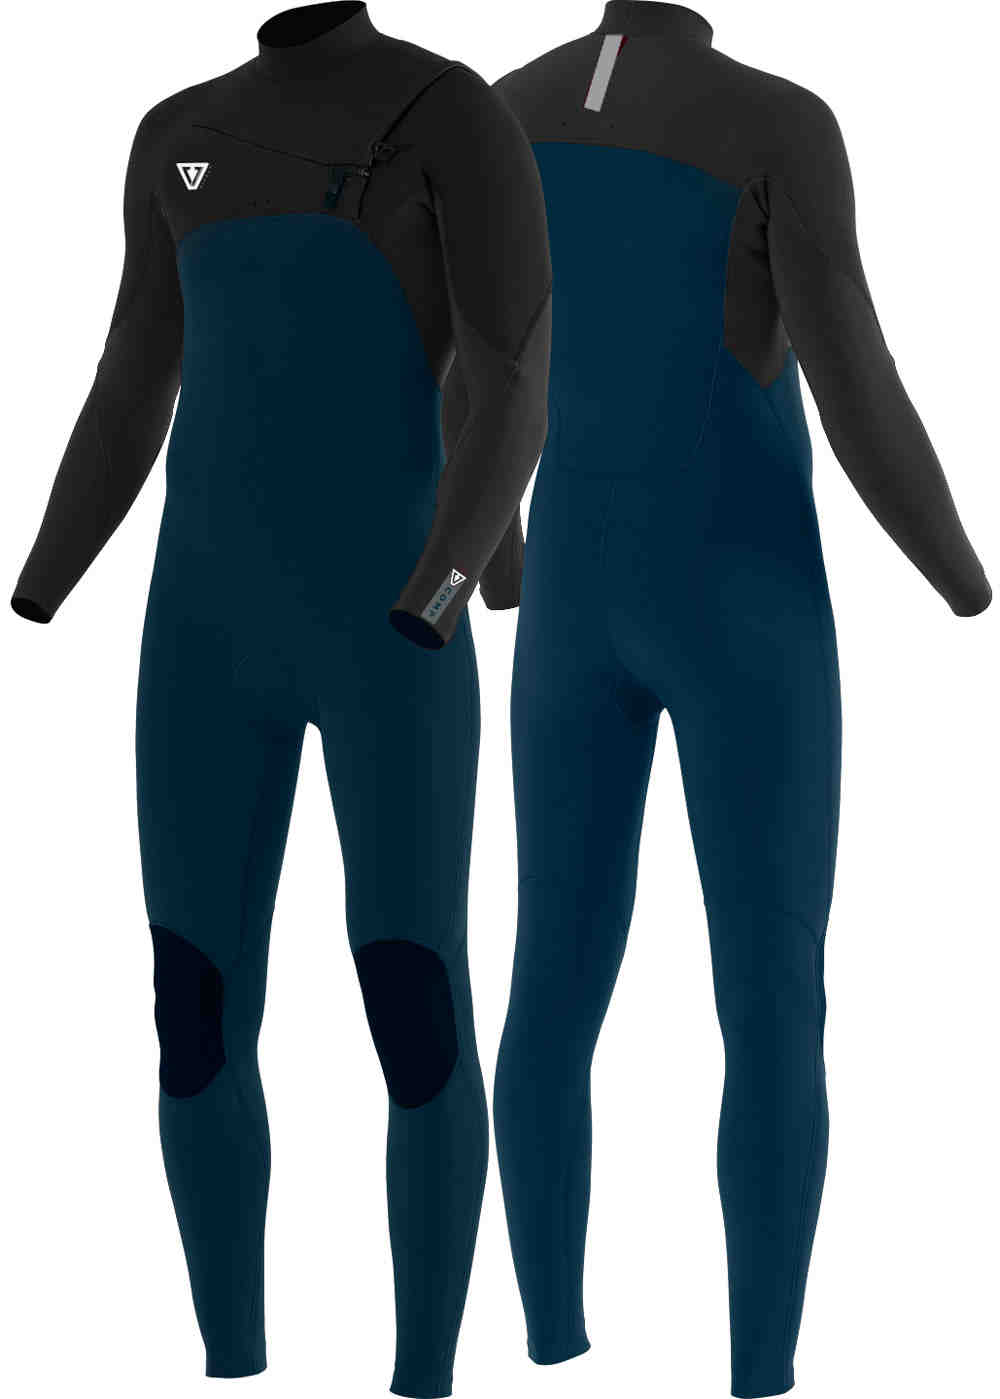 How long does a wetsuit last?